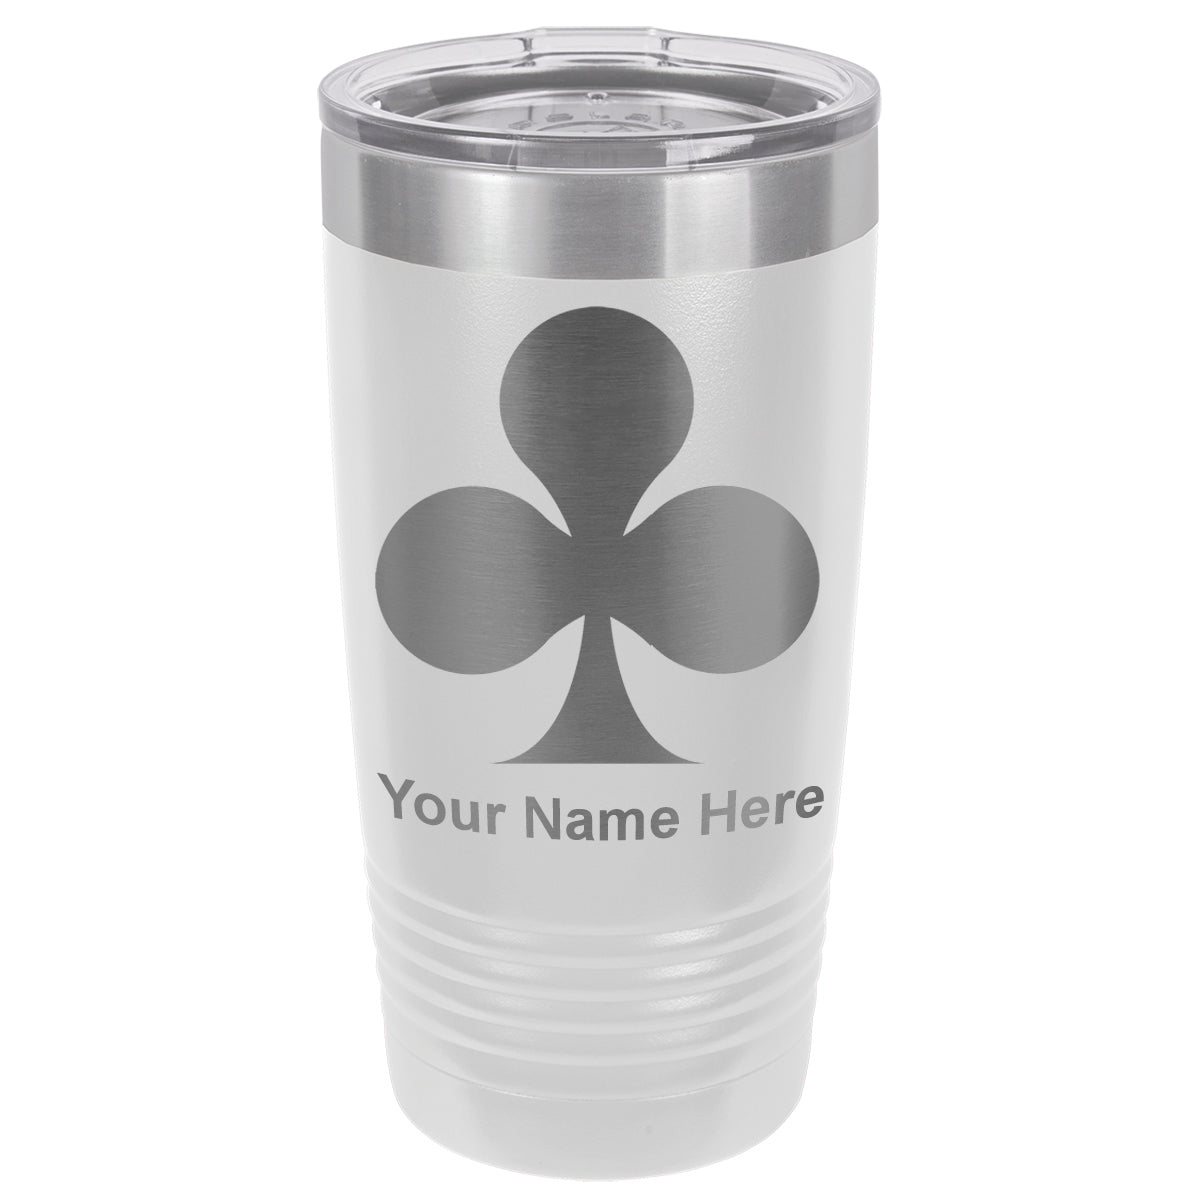 20oz Vacuum Insulated Tumbler Mug, Poker Clubs, Personalized Engraving Included